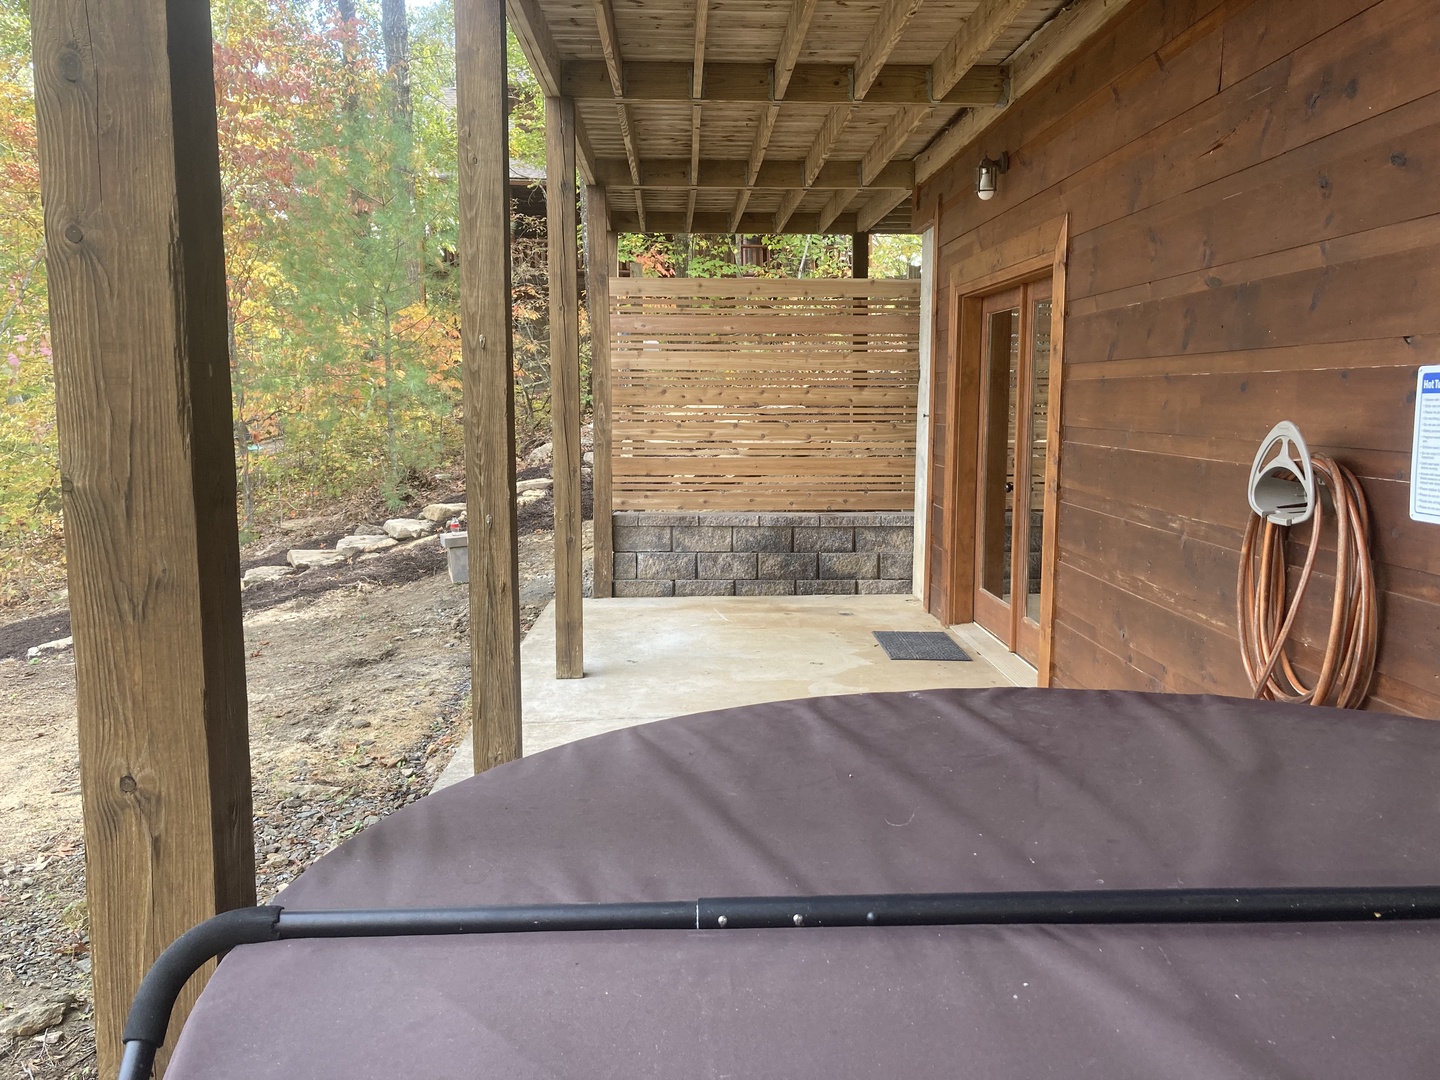 Enjoy the seclusion of the hot tub privacy wall while you soak the day away